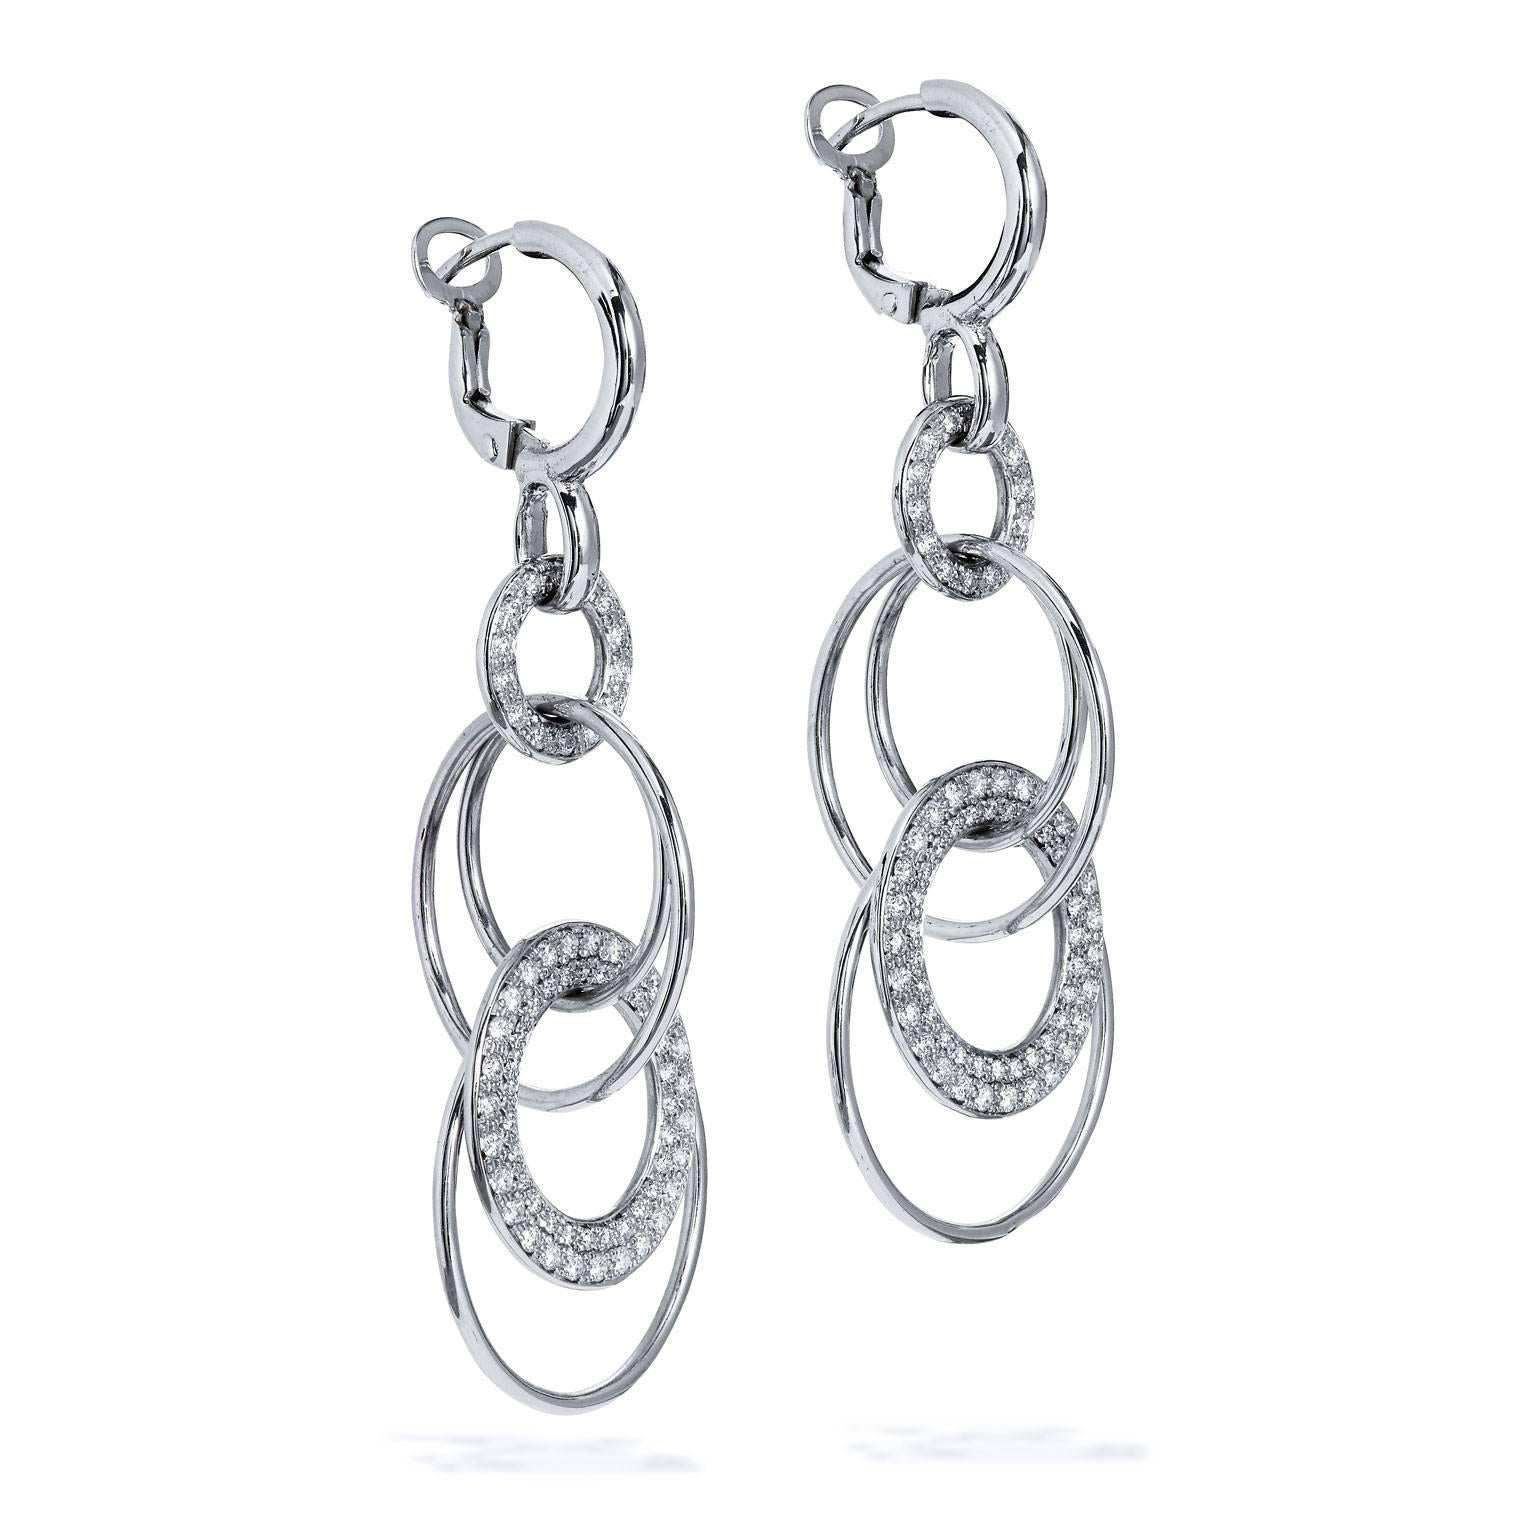 14 karat white gold dangle circus earrings featuring multiple interlaced circles and a total weight of 1.20 carat of diamond pave set.